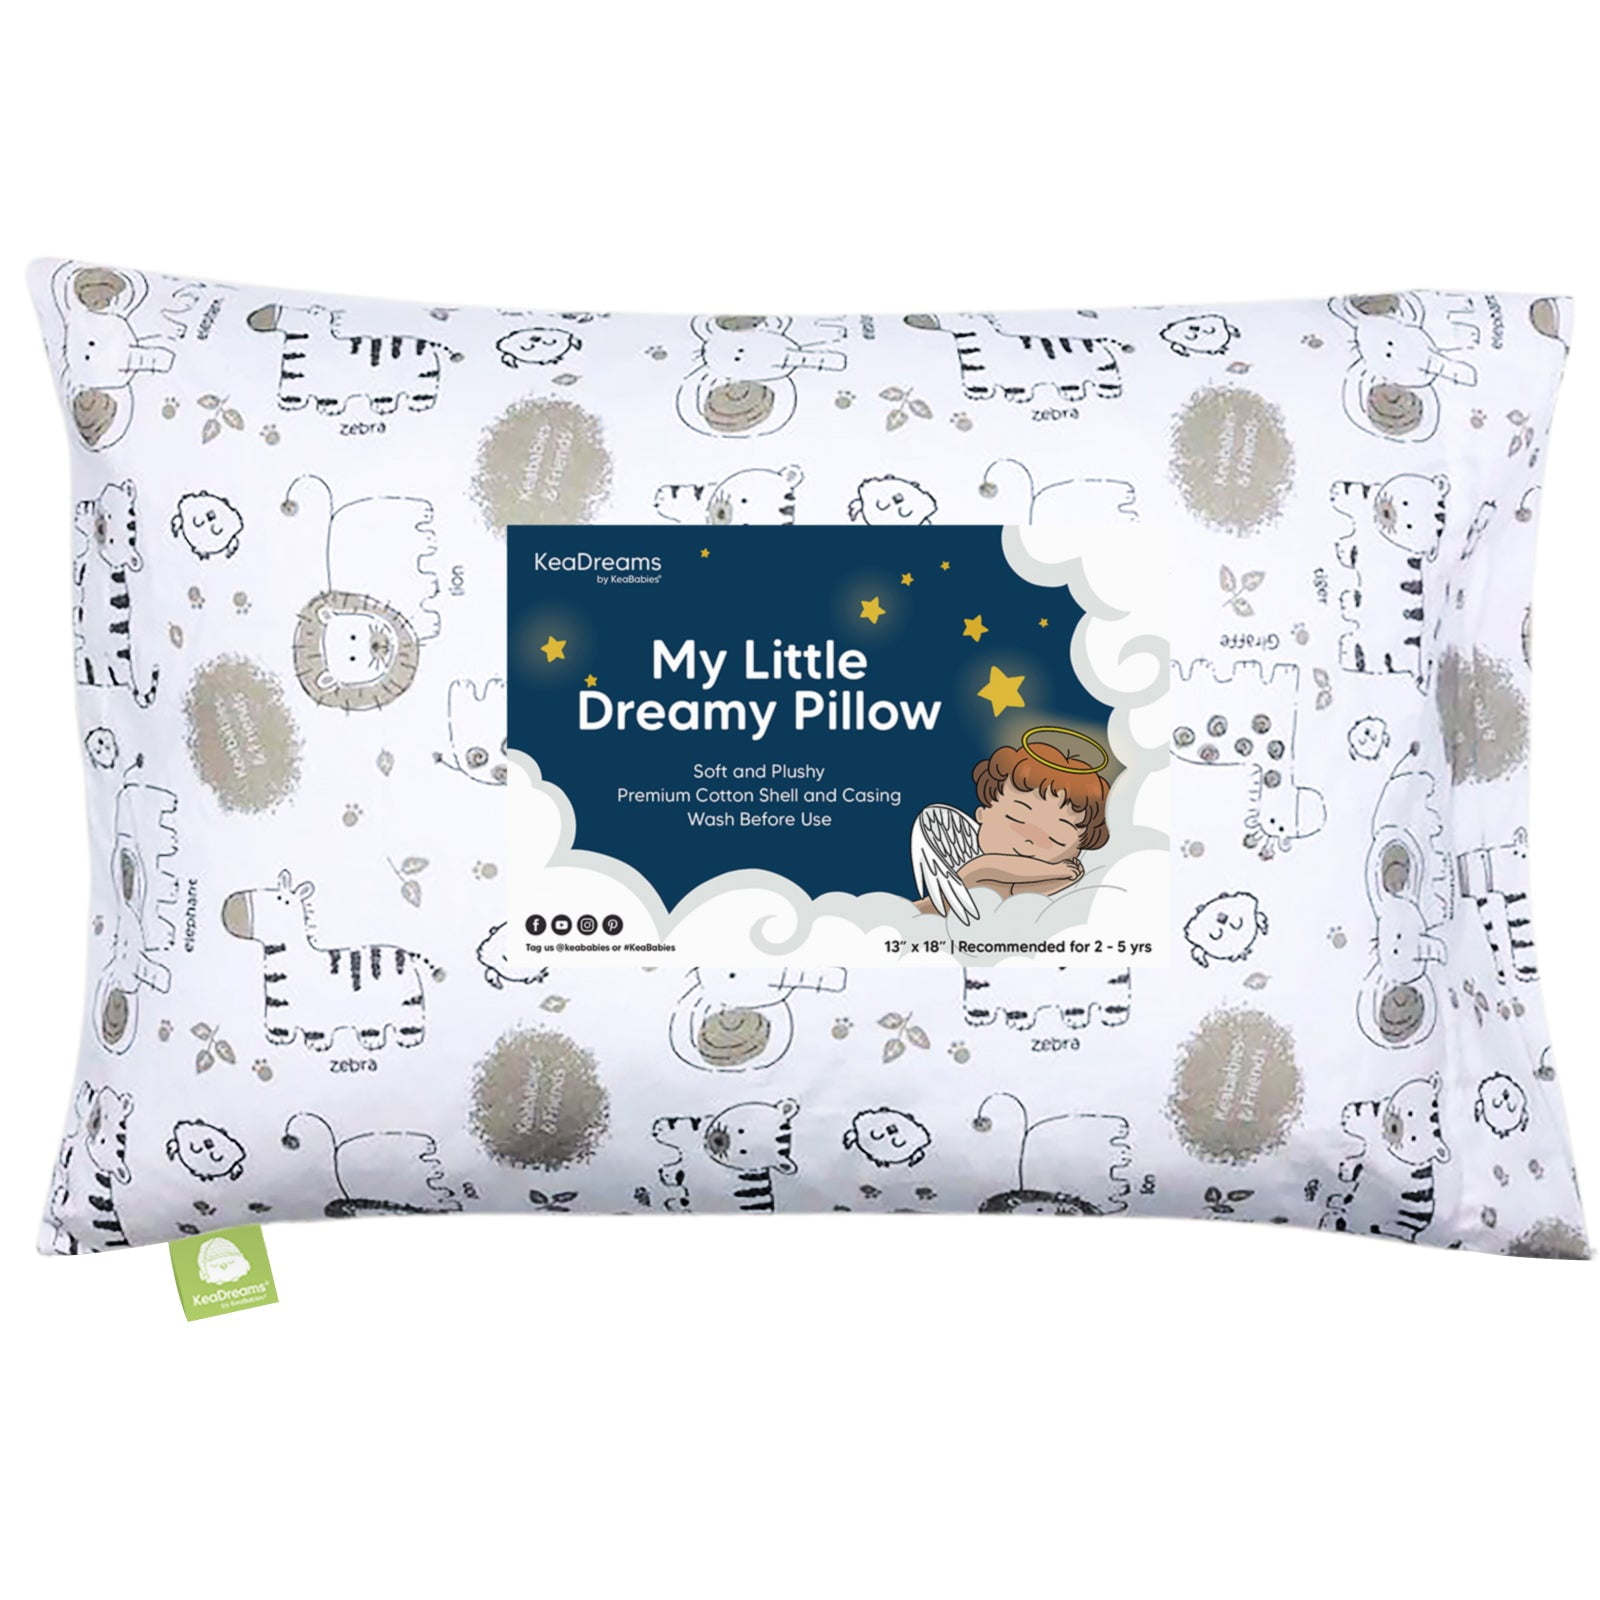 No Pillowcase Needed Best Buddies Hypoallergenic Toddler Pillow in Cute Designs Washable by A Little Pillow Company Napping & Reading Support Travel 13x18 Perfect for Toddlers School 